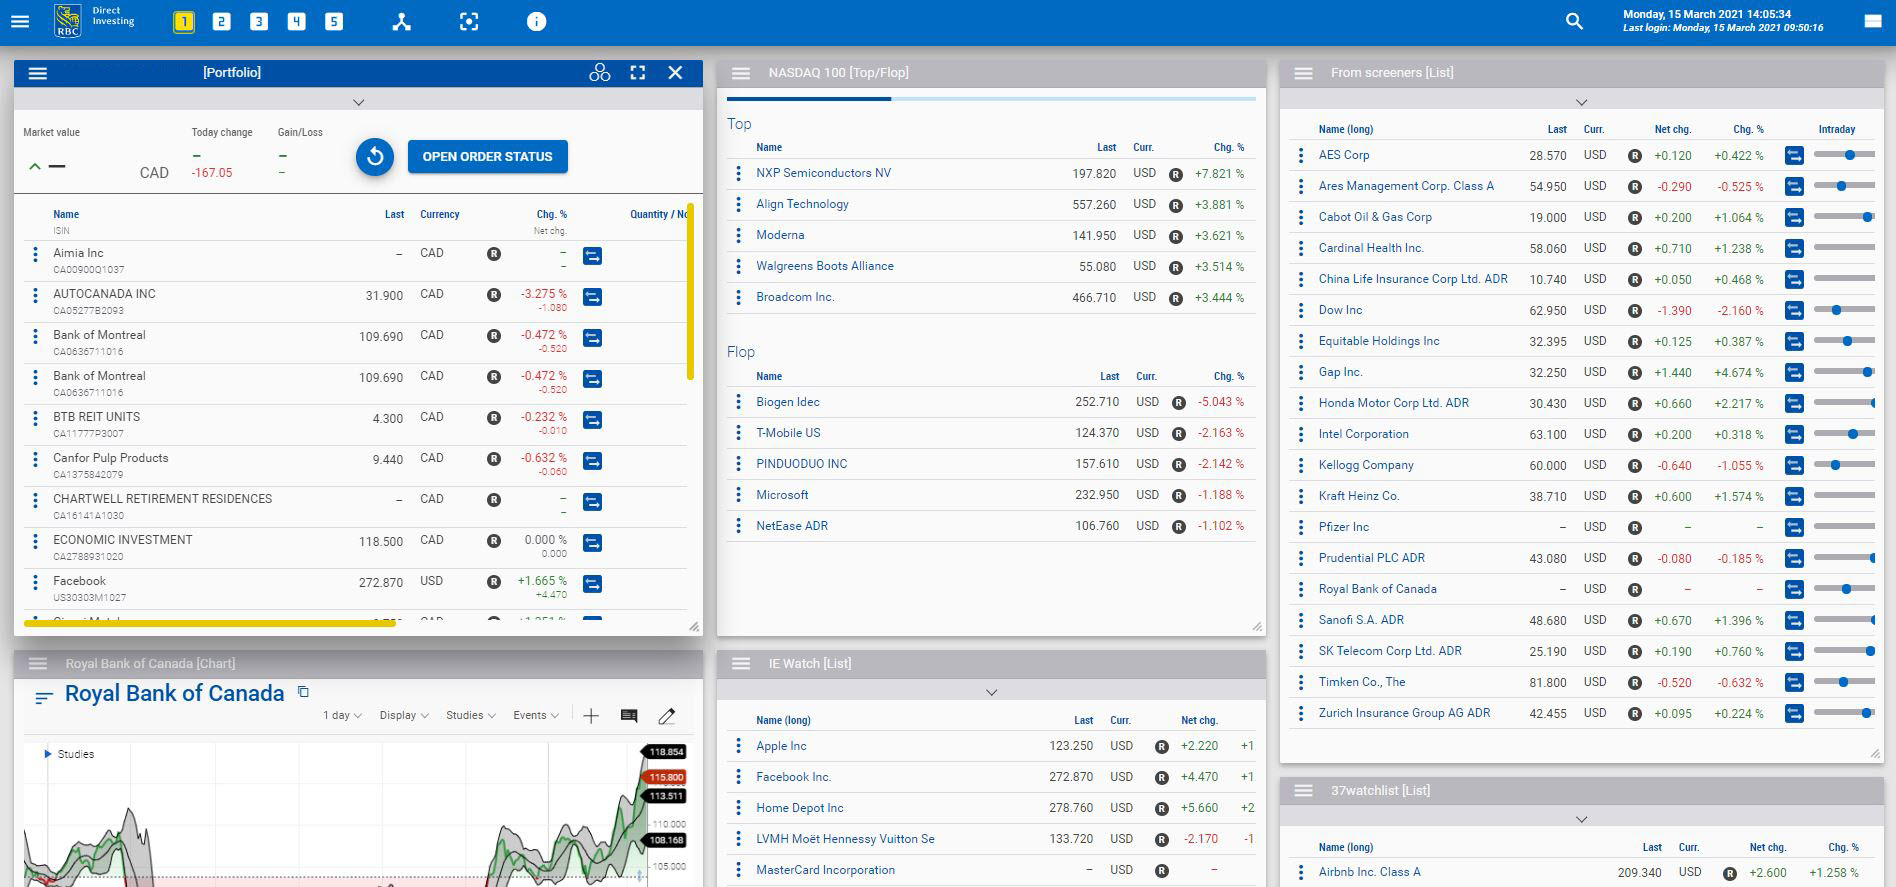 Screenshot of the RBC Direct Investing Trading Dashboard. On the display is an investor’s portfolio, and the Nasdaq 100 "Top/Flop" view.